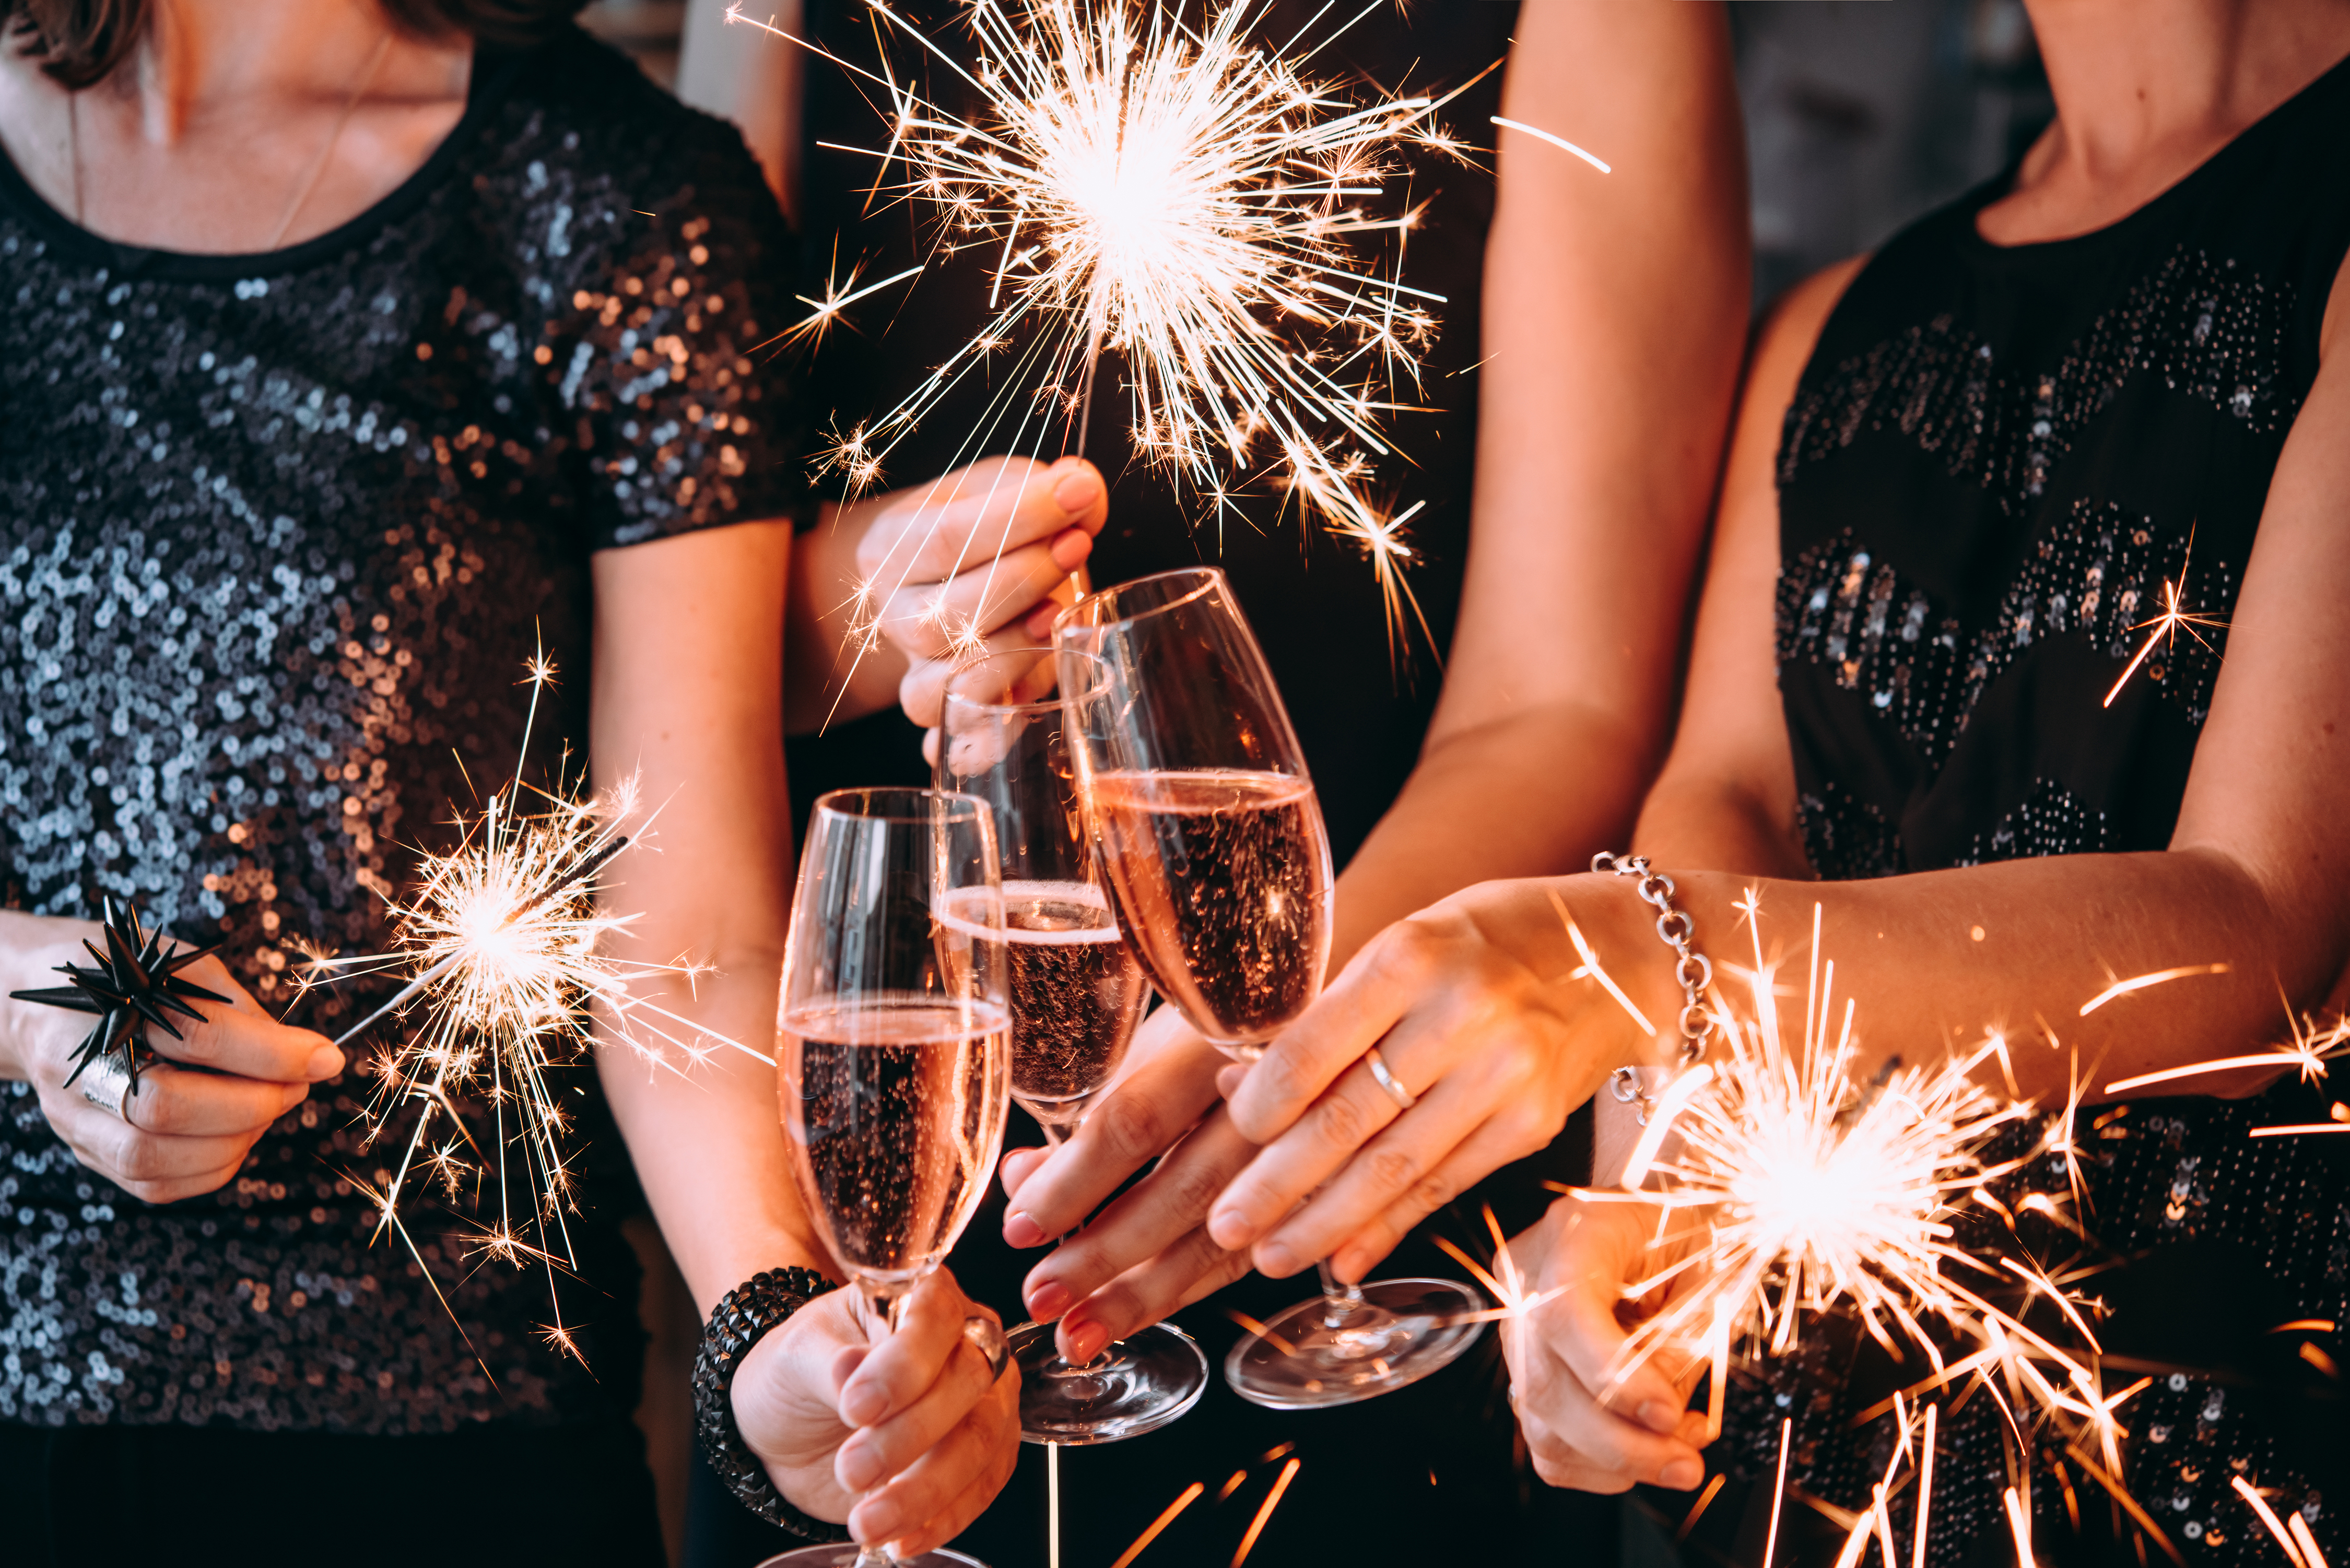 A group of friend celebrating new year with Bengal lights and rose champagne | Source: Shutterstock